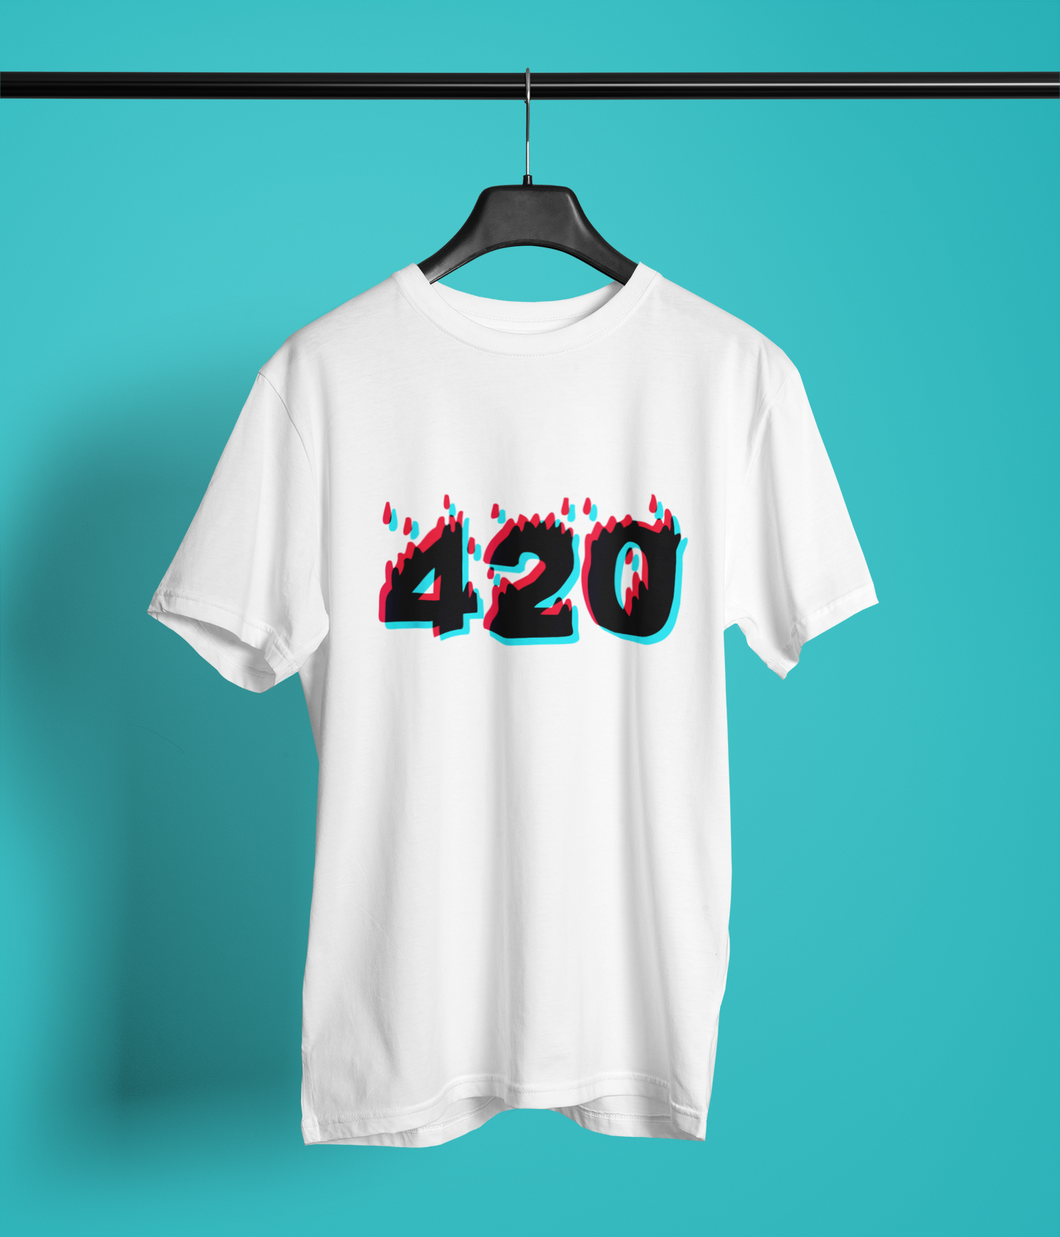 420 Sign